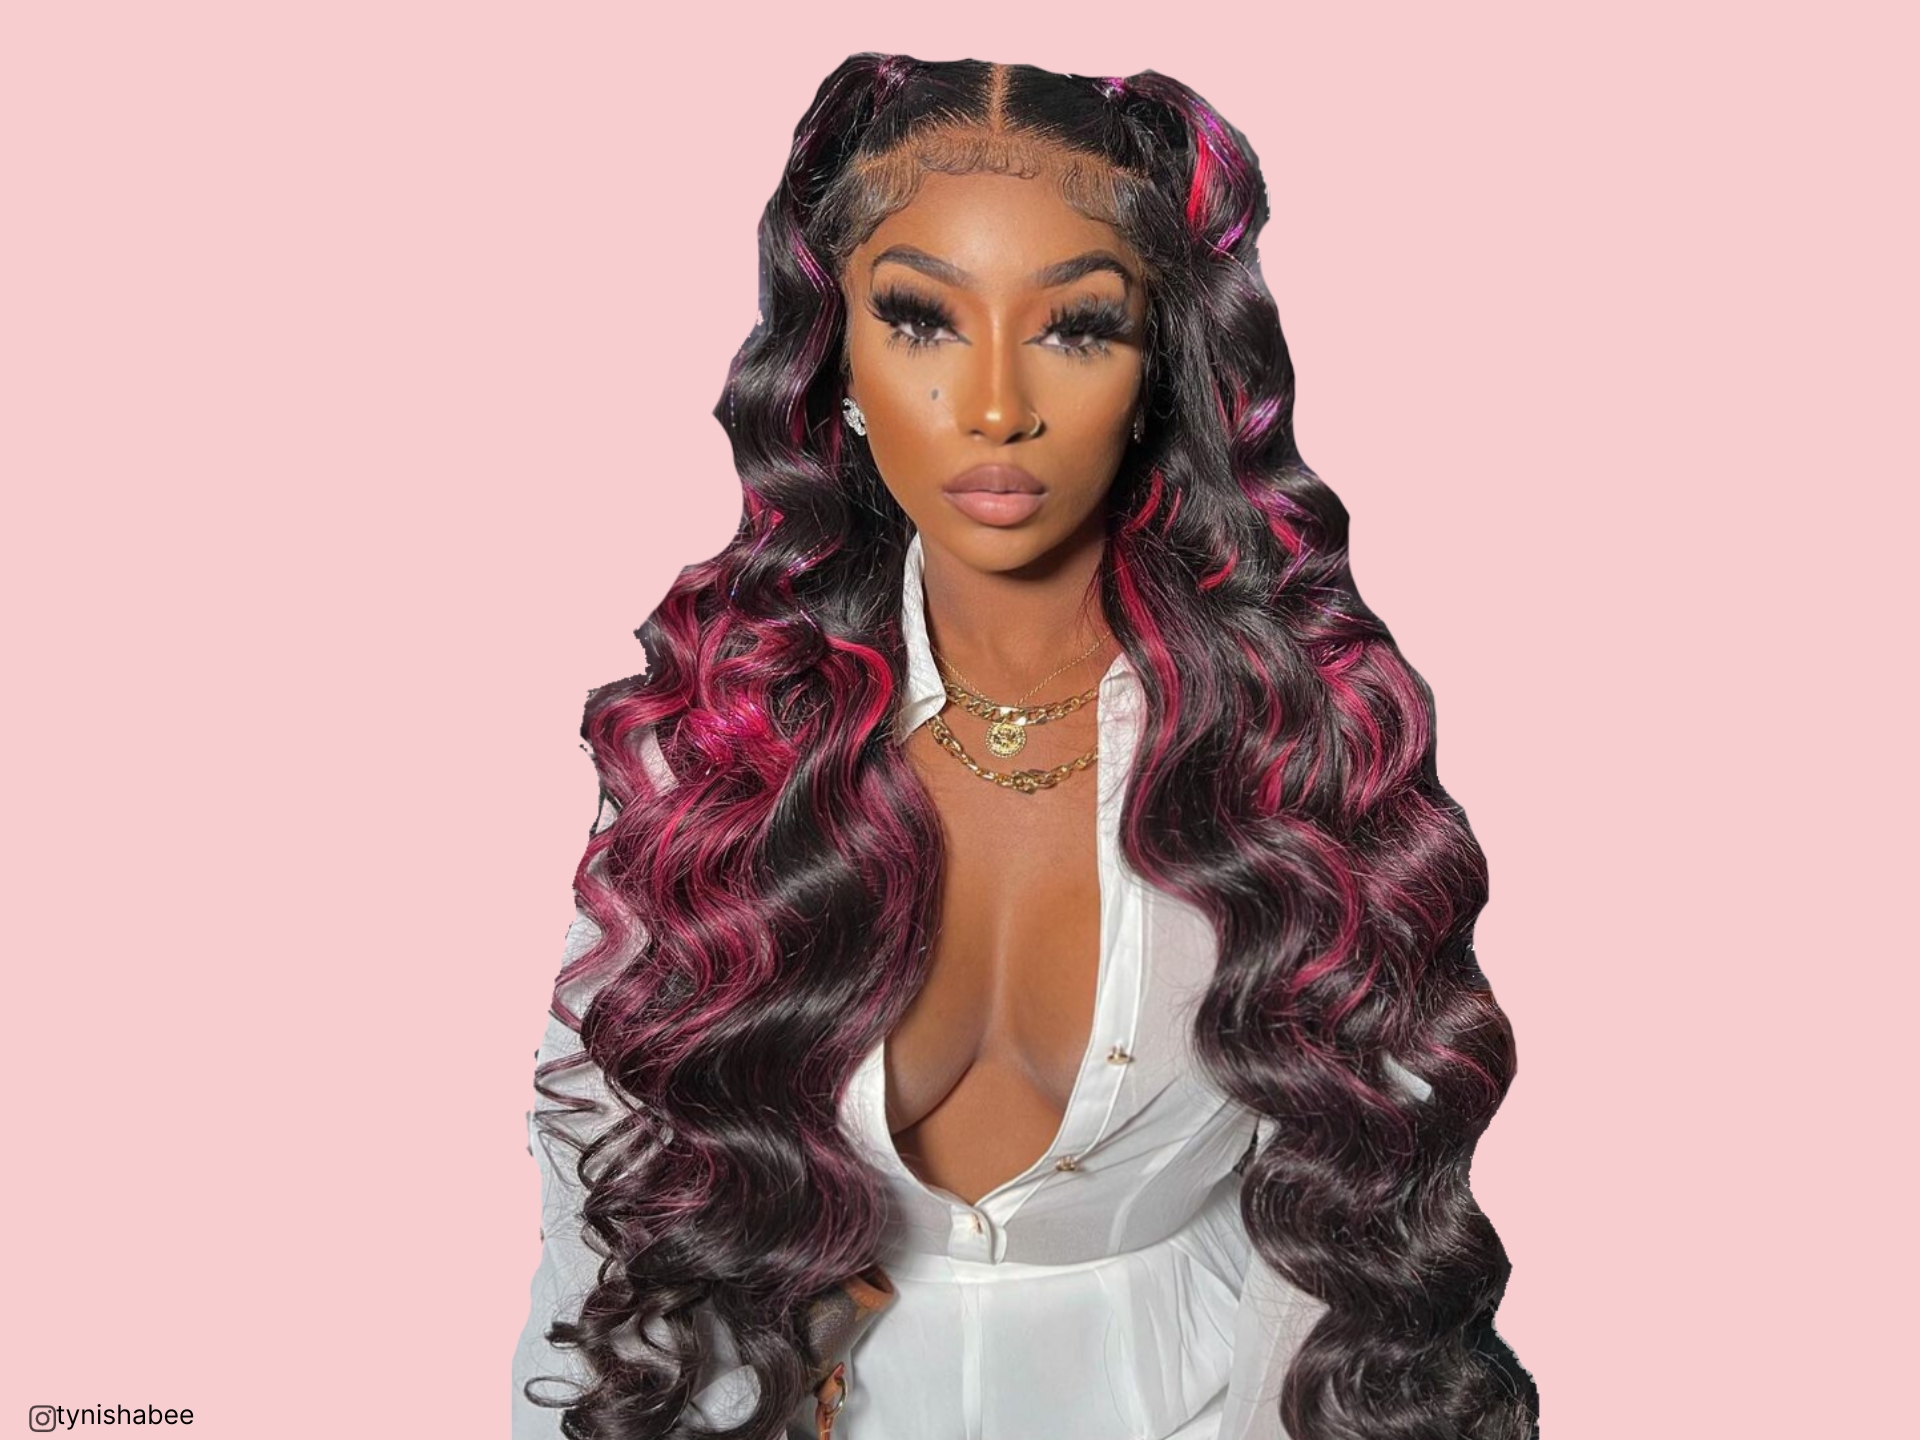 25 Spunky Pink Highlights In Black Hair Ideas To Inspire Your Next Dye-Job